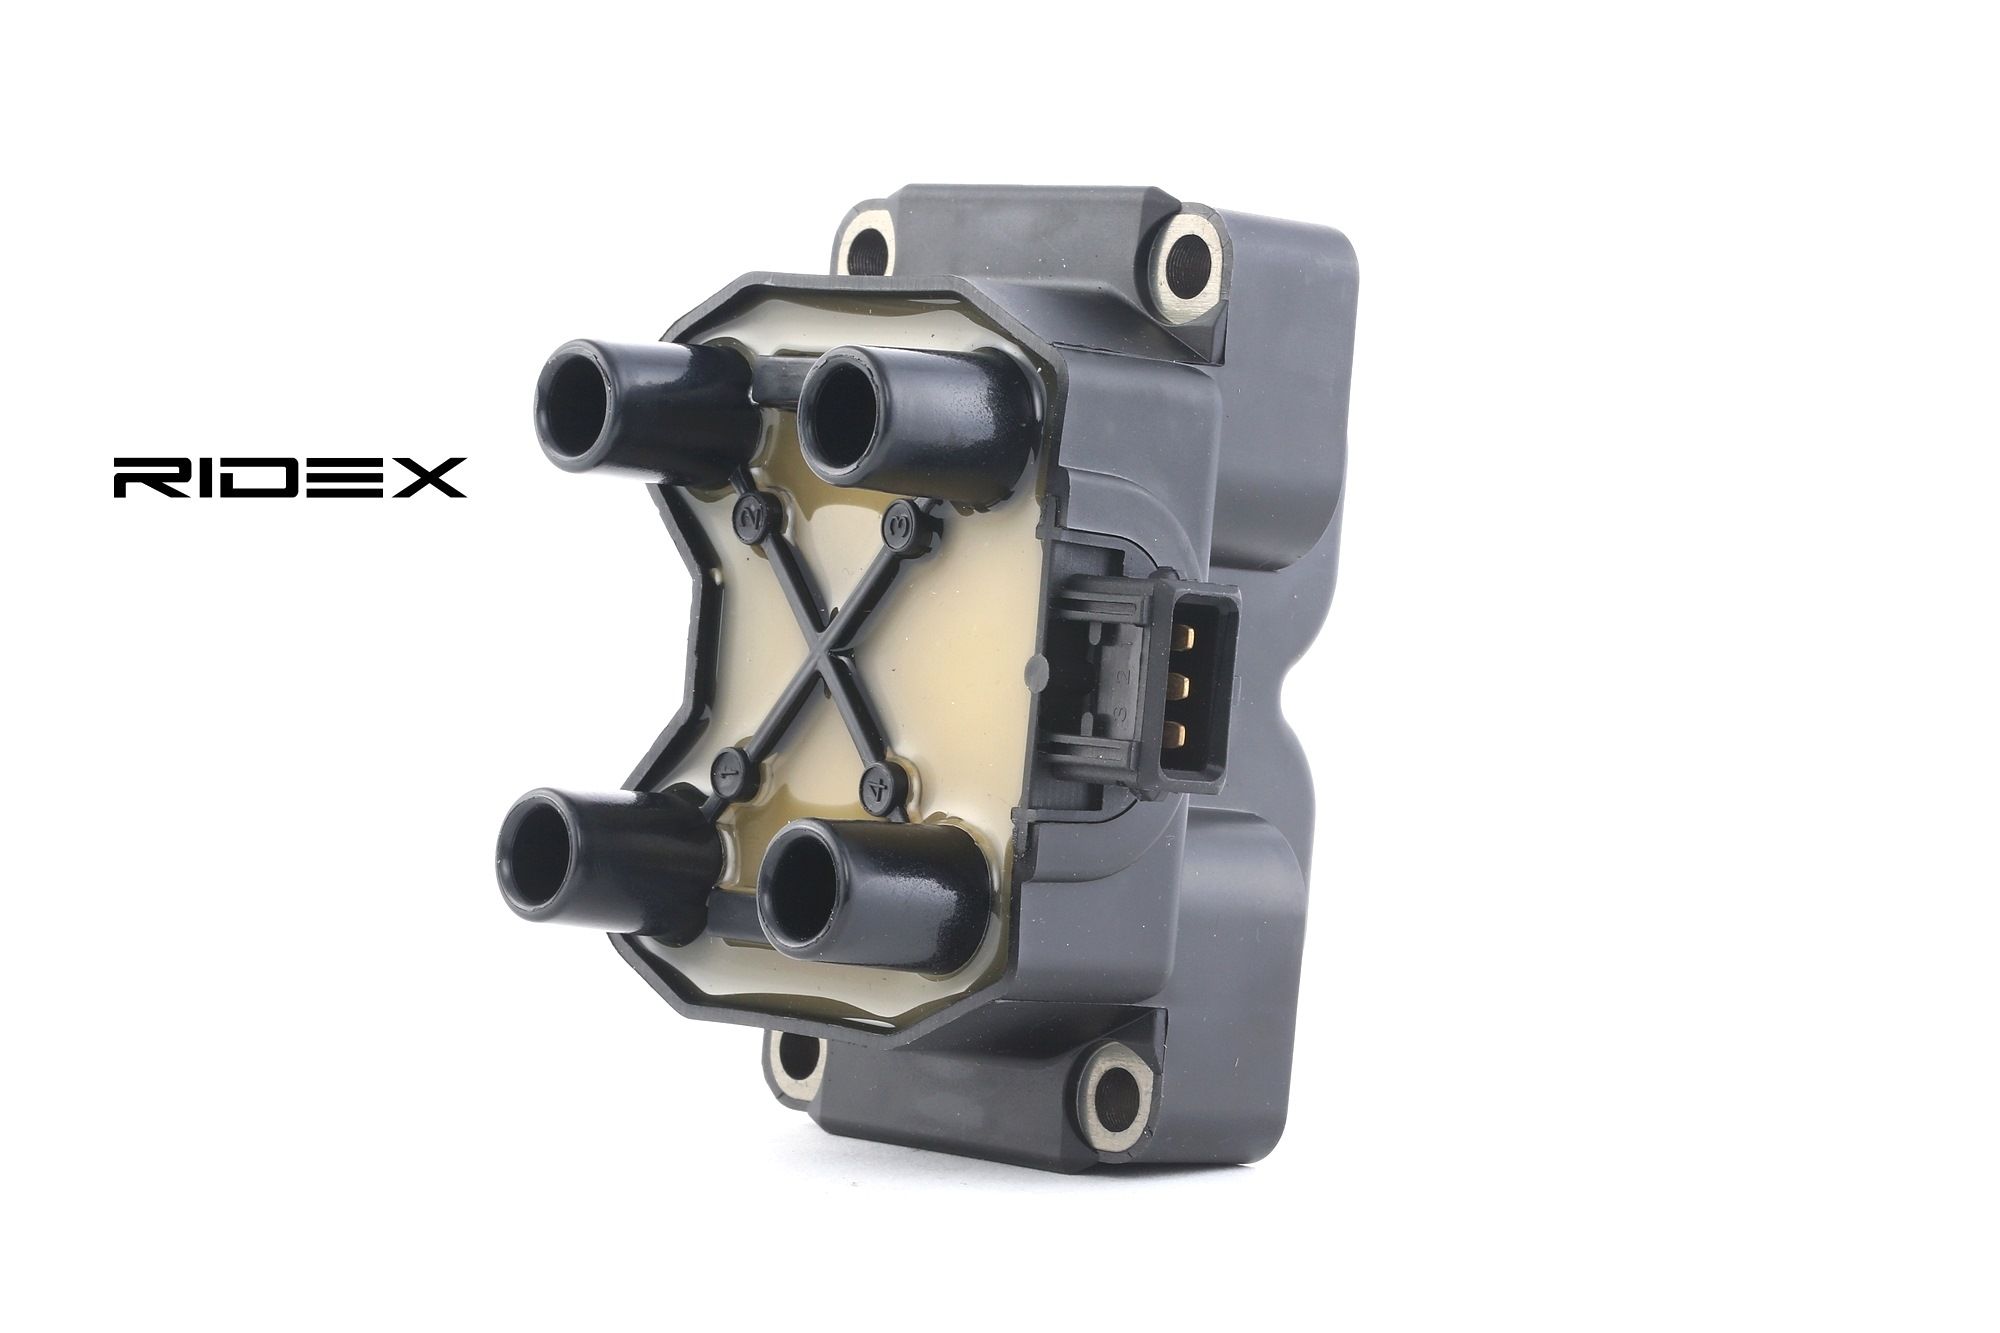 Image of RIDEX Ignition coil FIAT,PEUGEOT,CITROËN 689C0053 60558152,60586072,60809606 Coil pack,Ignition coil pack,Engine coil,Engine coil pack 7648797,597053